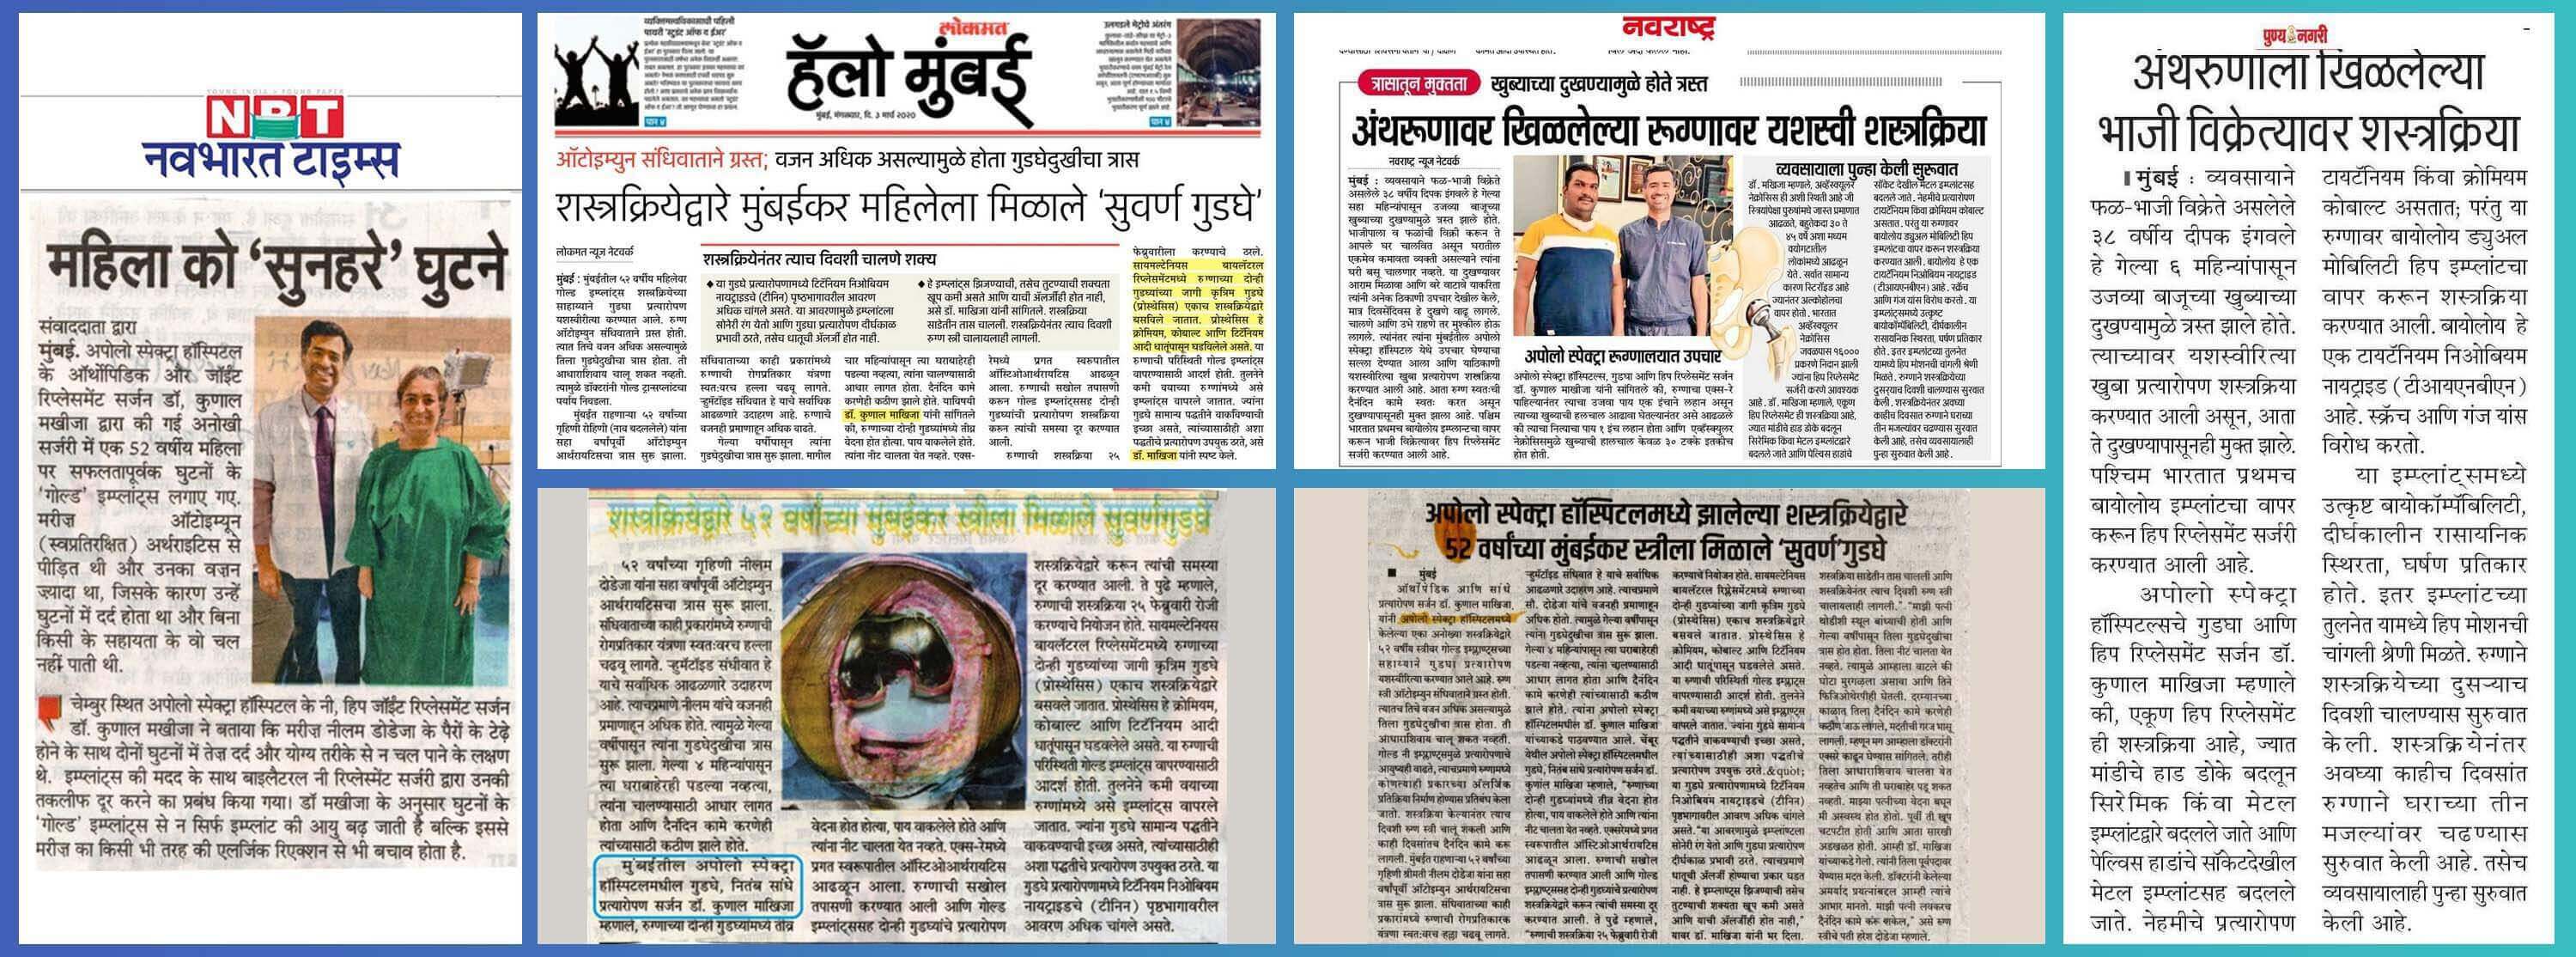 dr kunal makhija recognized by media for his contribution in knee replacement success story